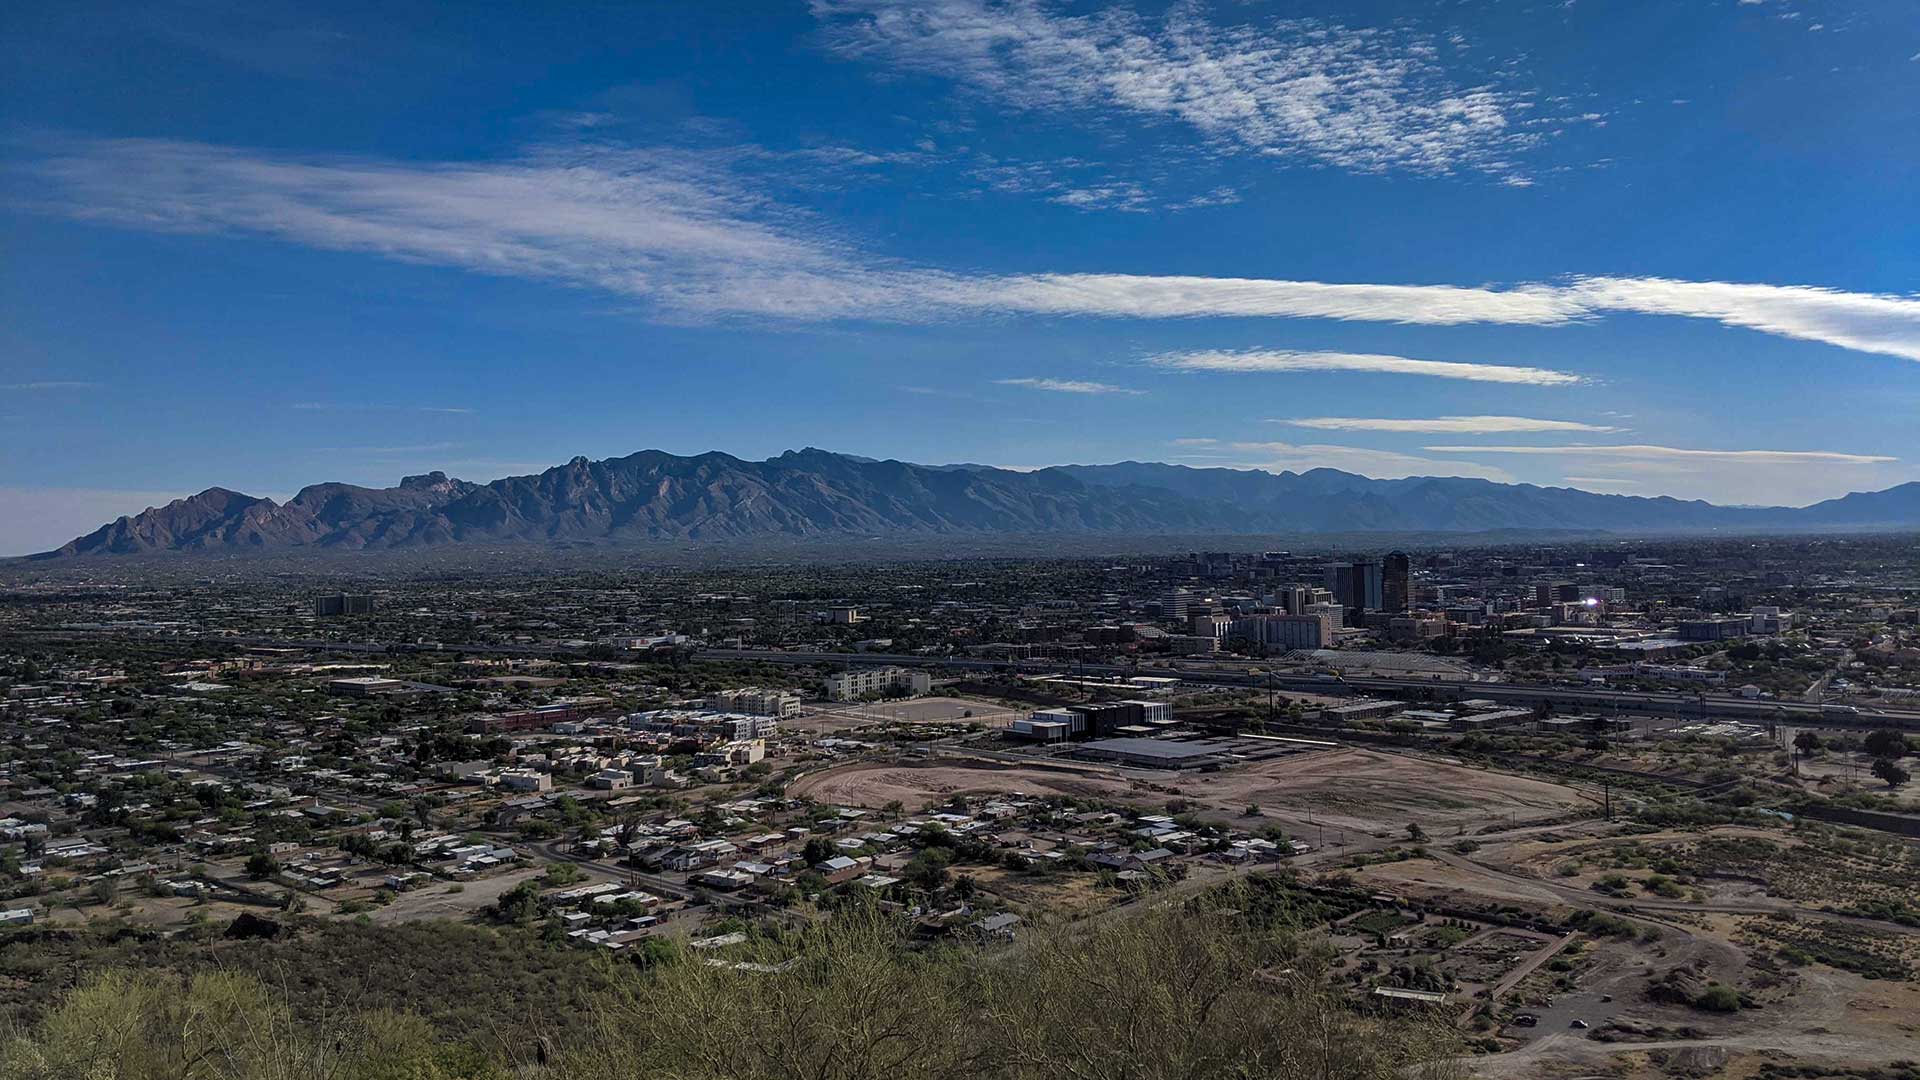 A Pima County official says fewer people driving amid COVID-19 restrictions appears to be contributing to less pollution in the air. 